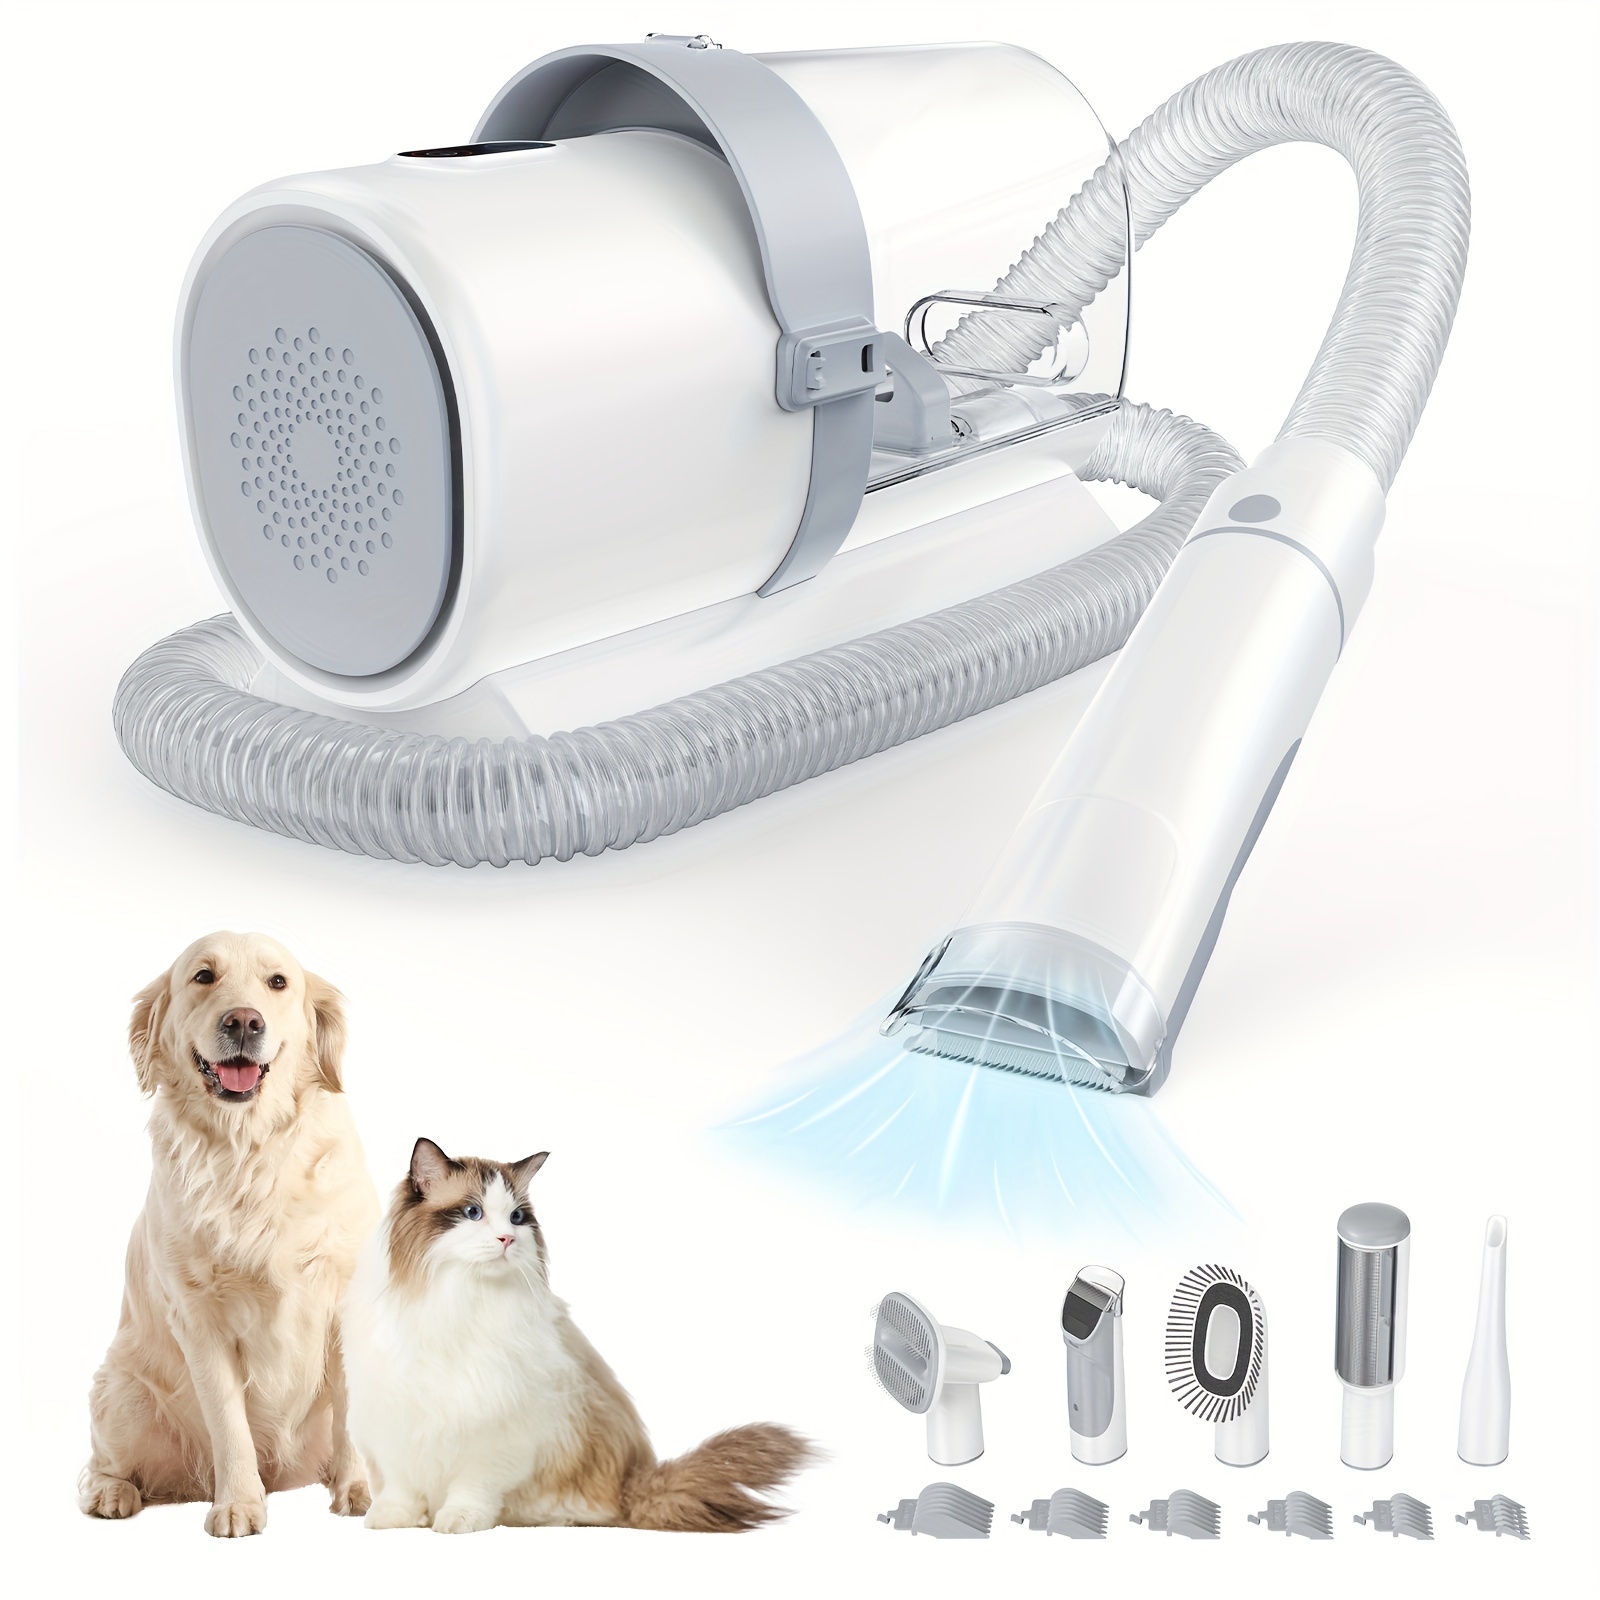 

Dog Grooming Vacuum Kit 5 In 1, Pet Grooming Vacuum With 6 Guide Combs, Strong Power Multifunctional Grooming Tools For Shedding Pet Hair, Home Cleaning